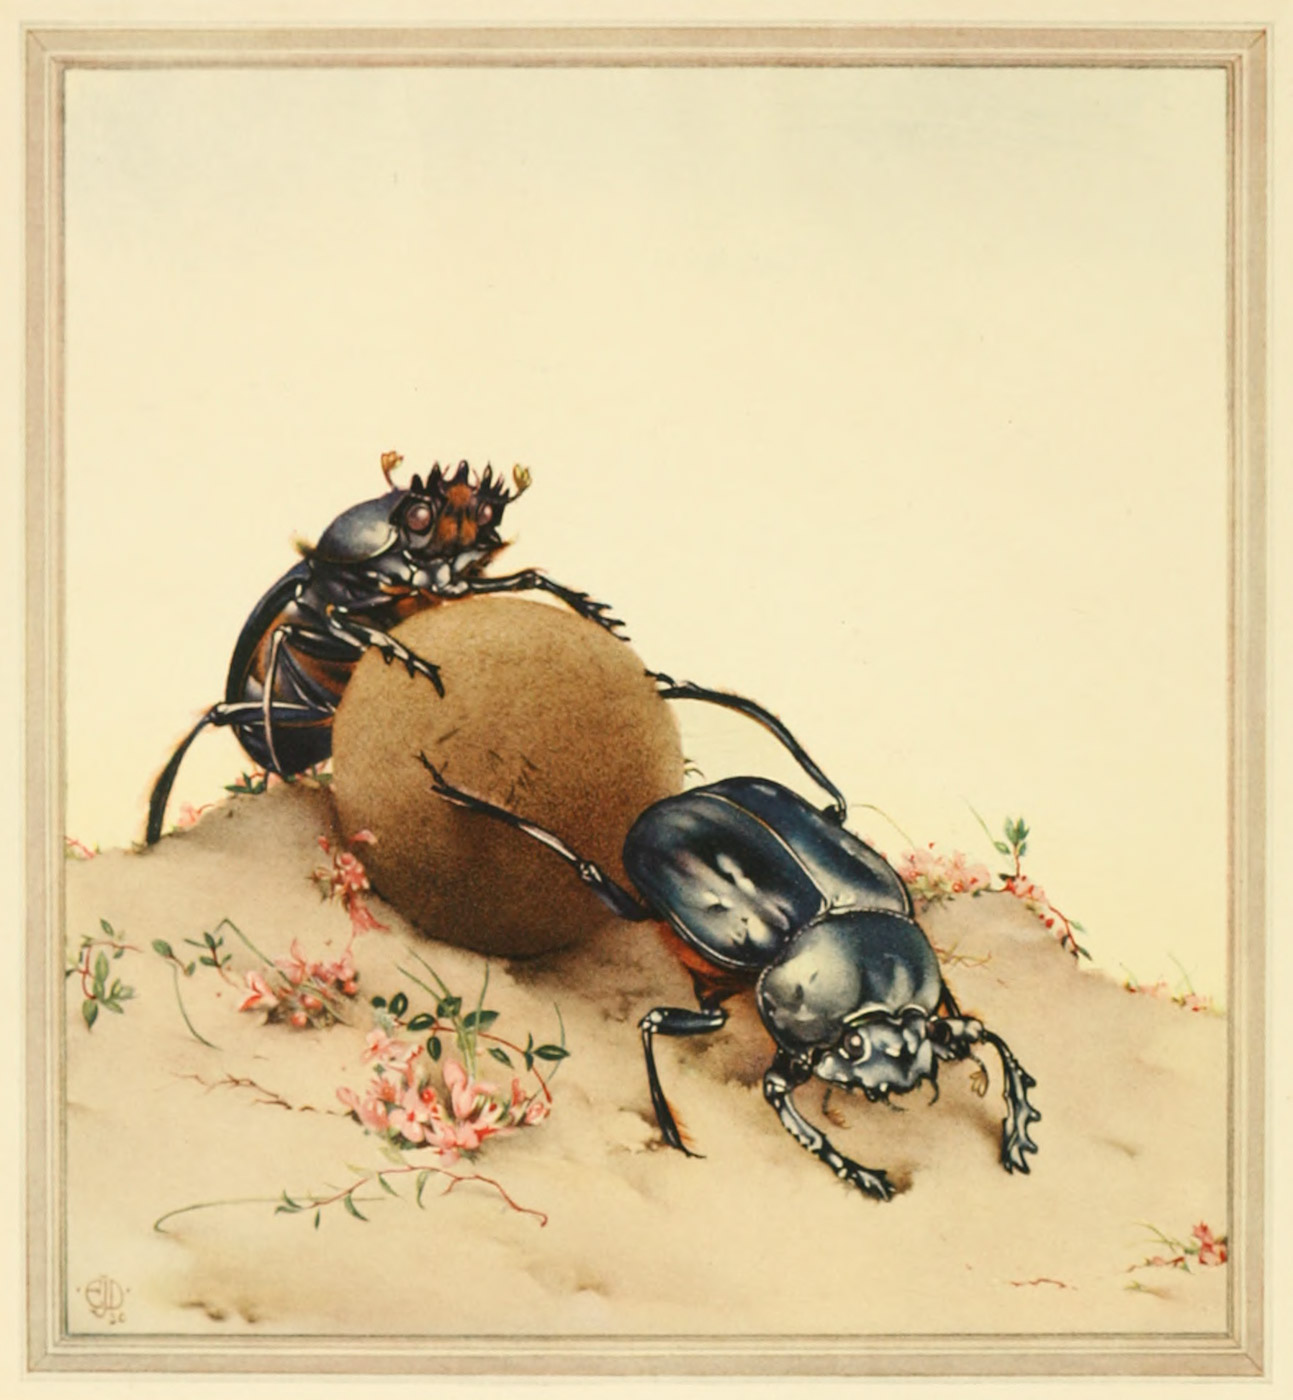 An illustration of two dung beetles rolling a ball of dung